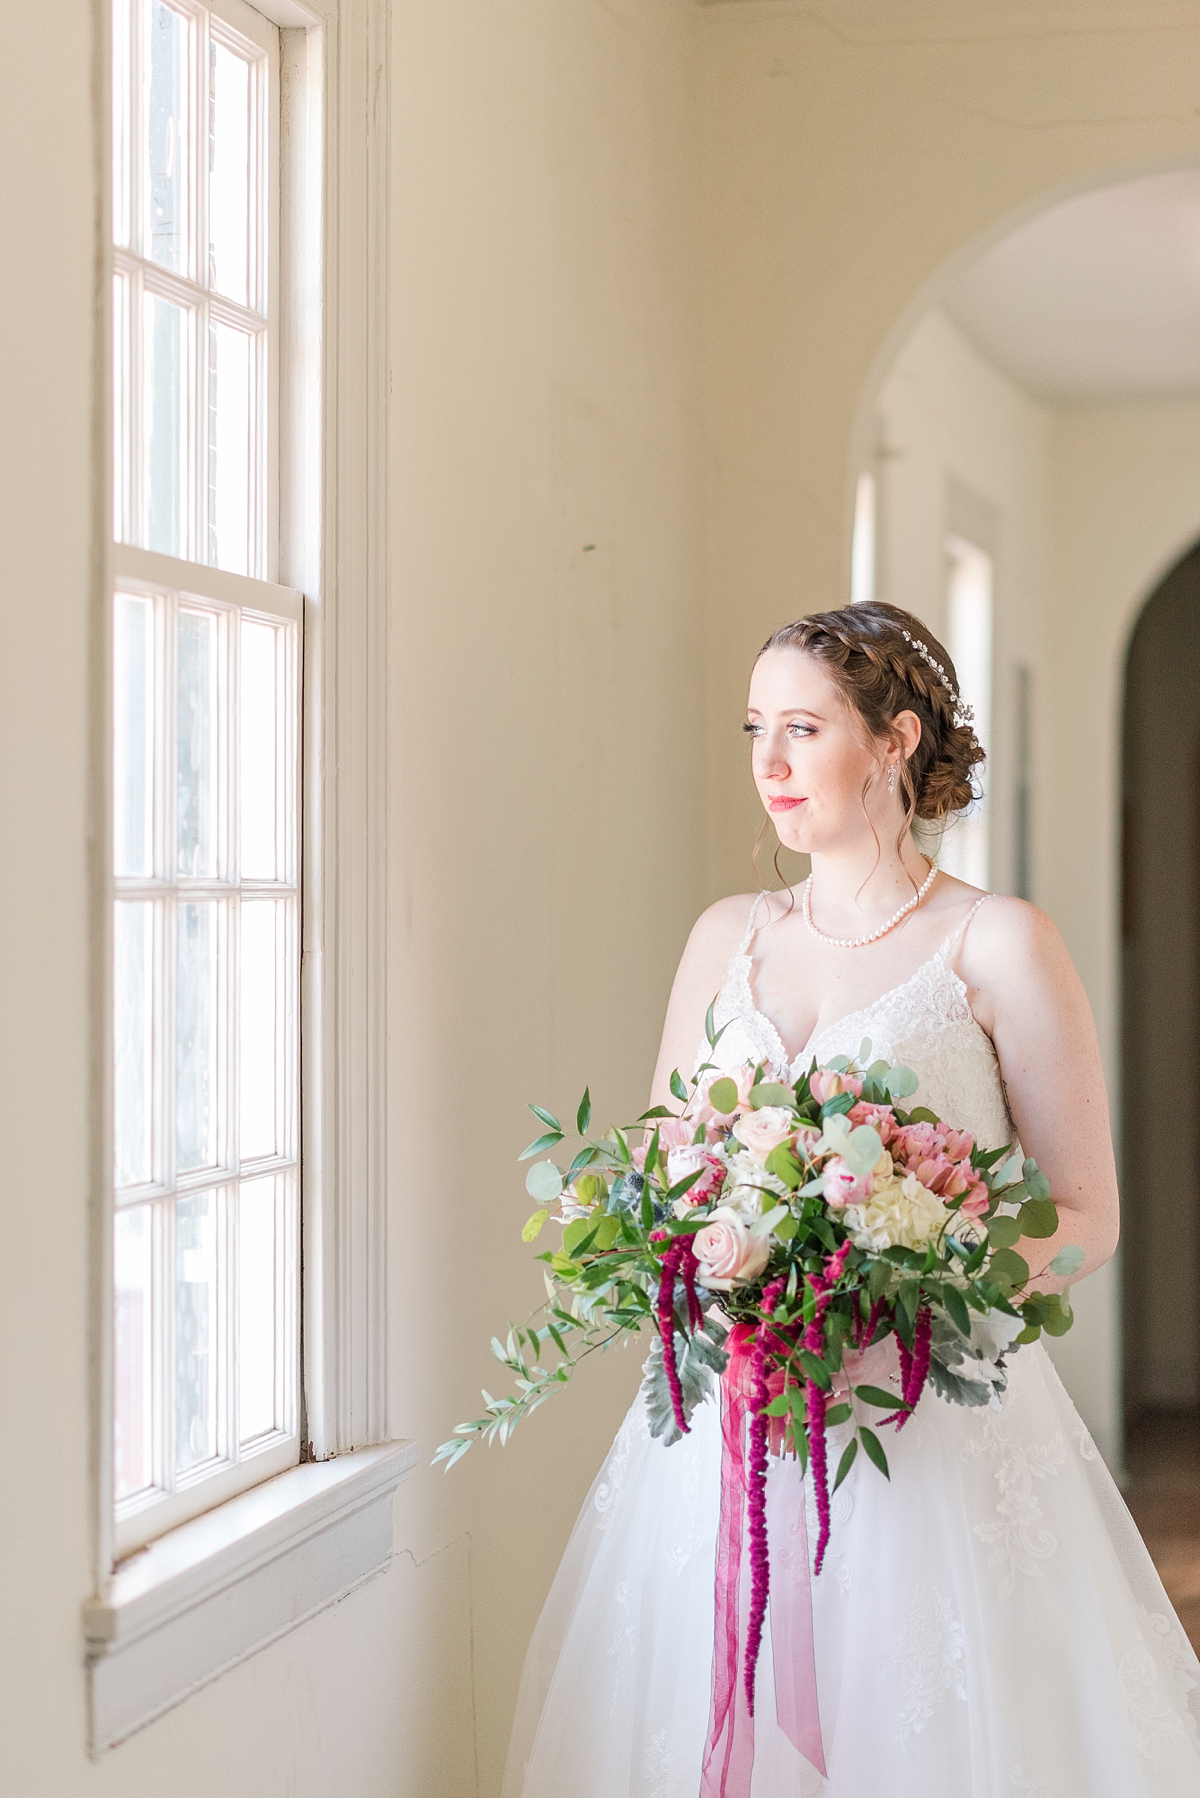 Bridal Portraits at Hanover Tavern Fall Wedding. Wedding Photography by Richmond Wedding Photographer Kailey Brianne Photography. Florals by Lavender Lane Flowers & Gifts